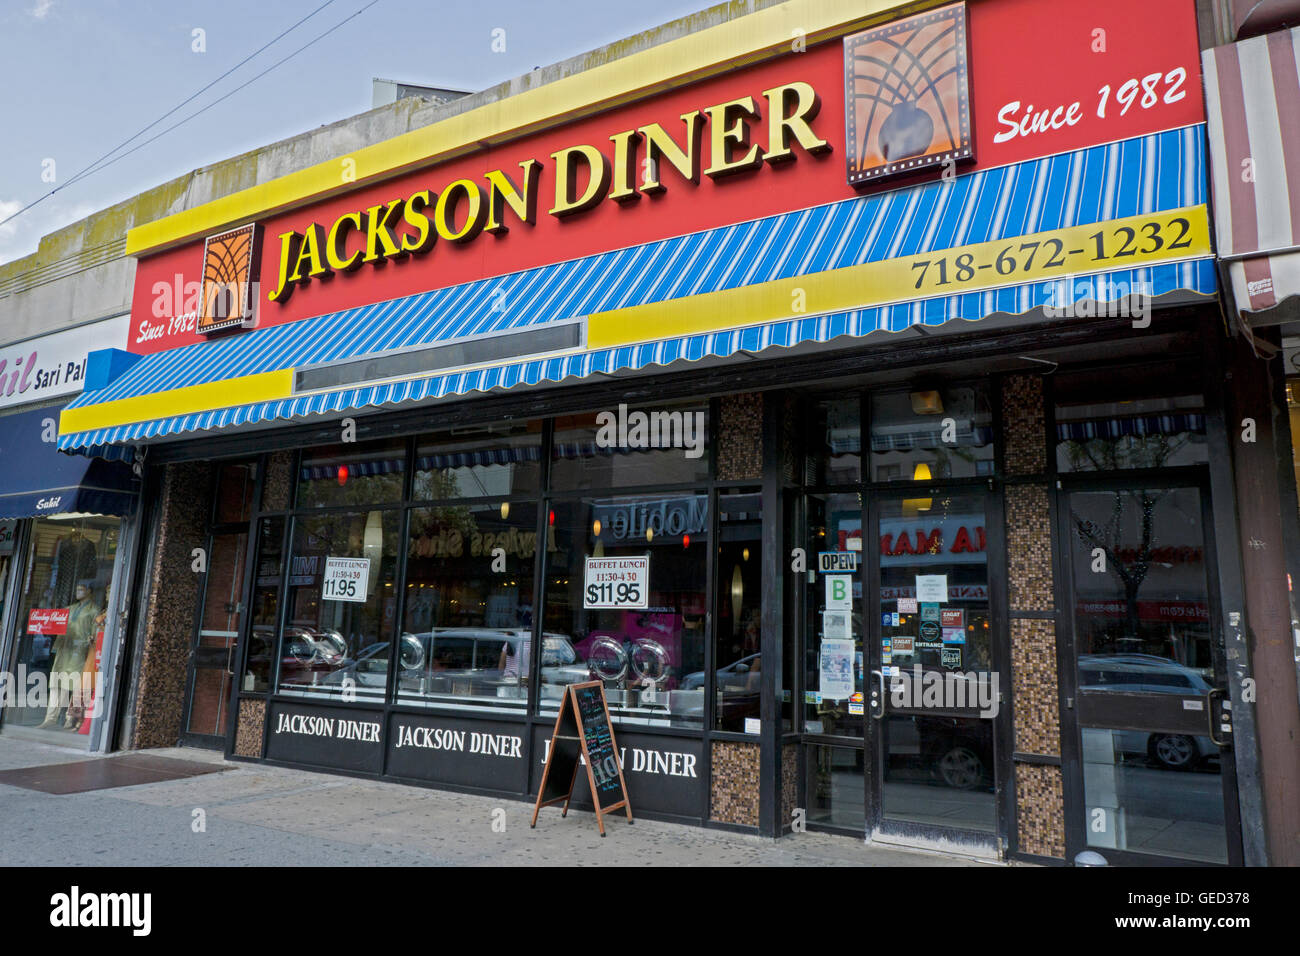 The Jackson Diner Indian restaurant on 74th Street in Jackson Heights, Queens, New York. Stock Photo